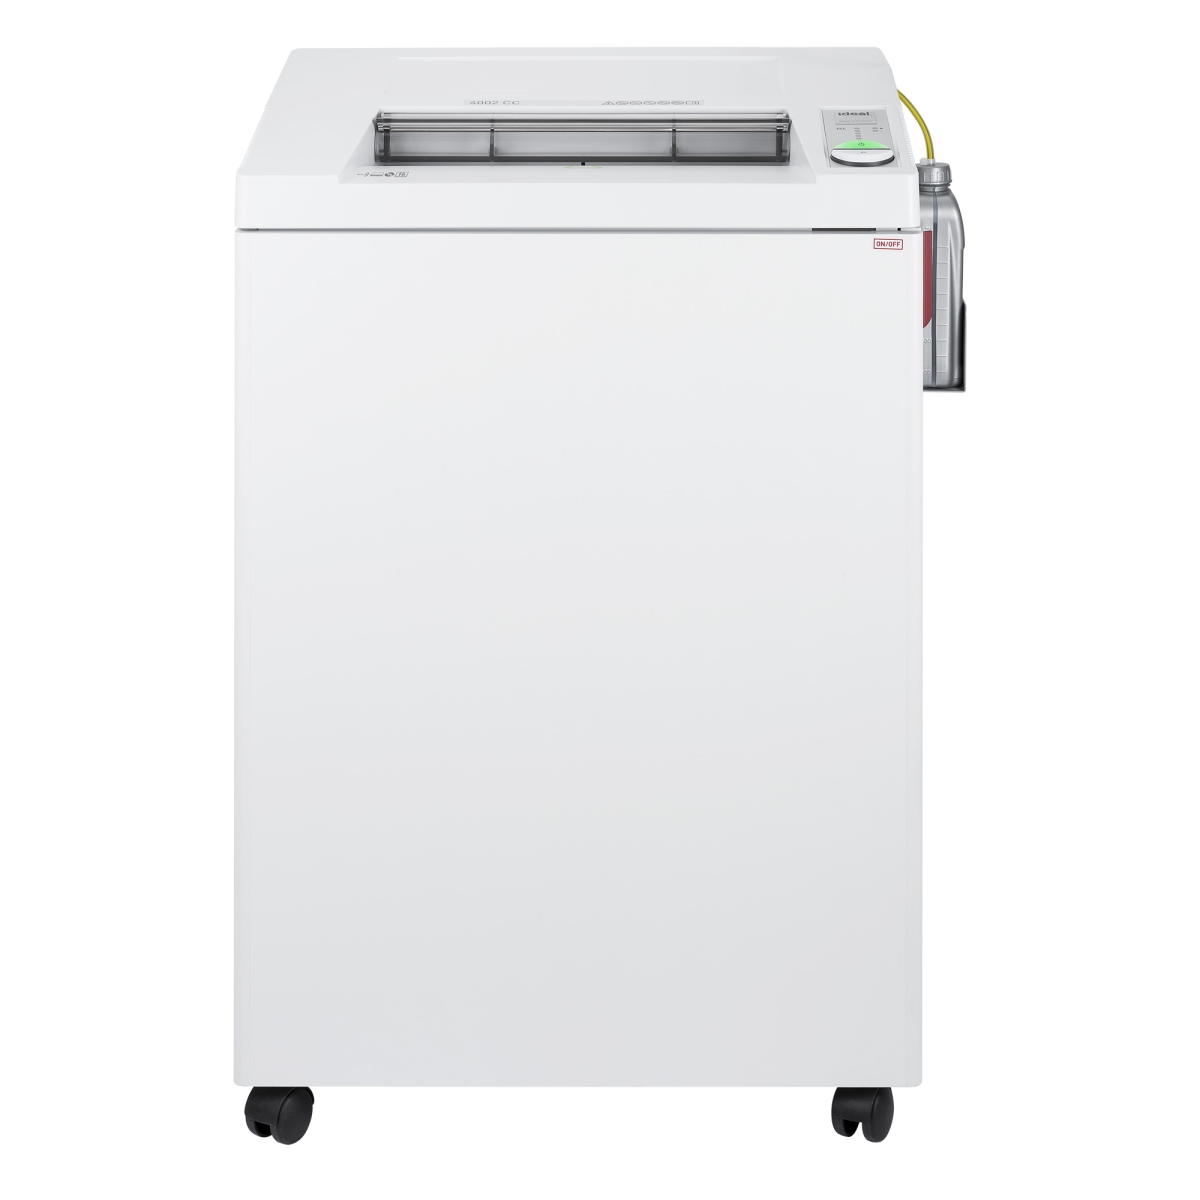 Ideal . 4002 cross-cut paper shredder  P-5 security level  designed for 8-13 users  shreds 14-16 sheets at a time